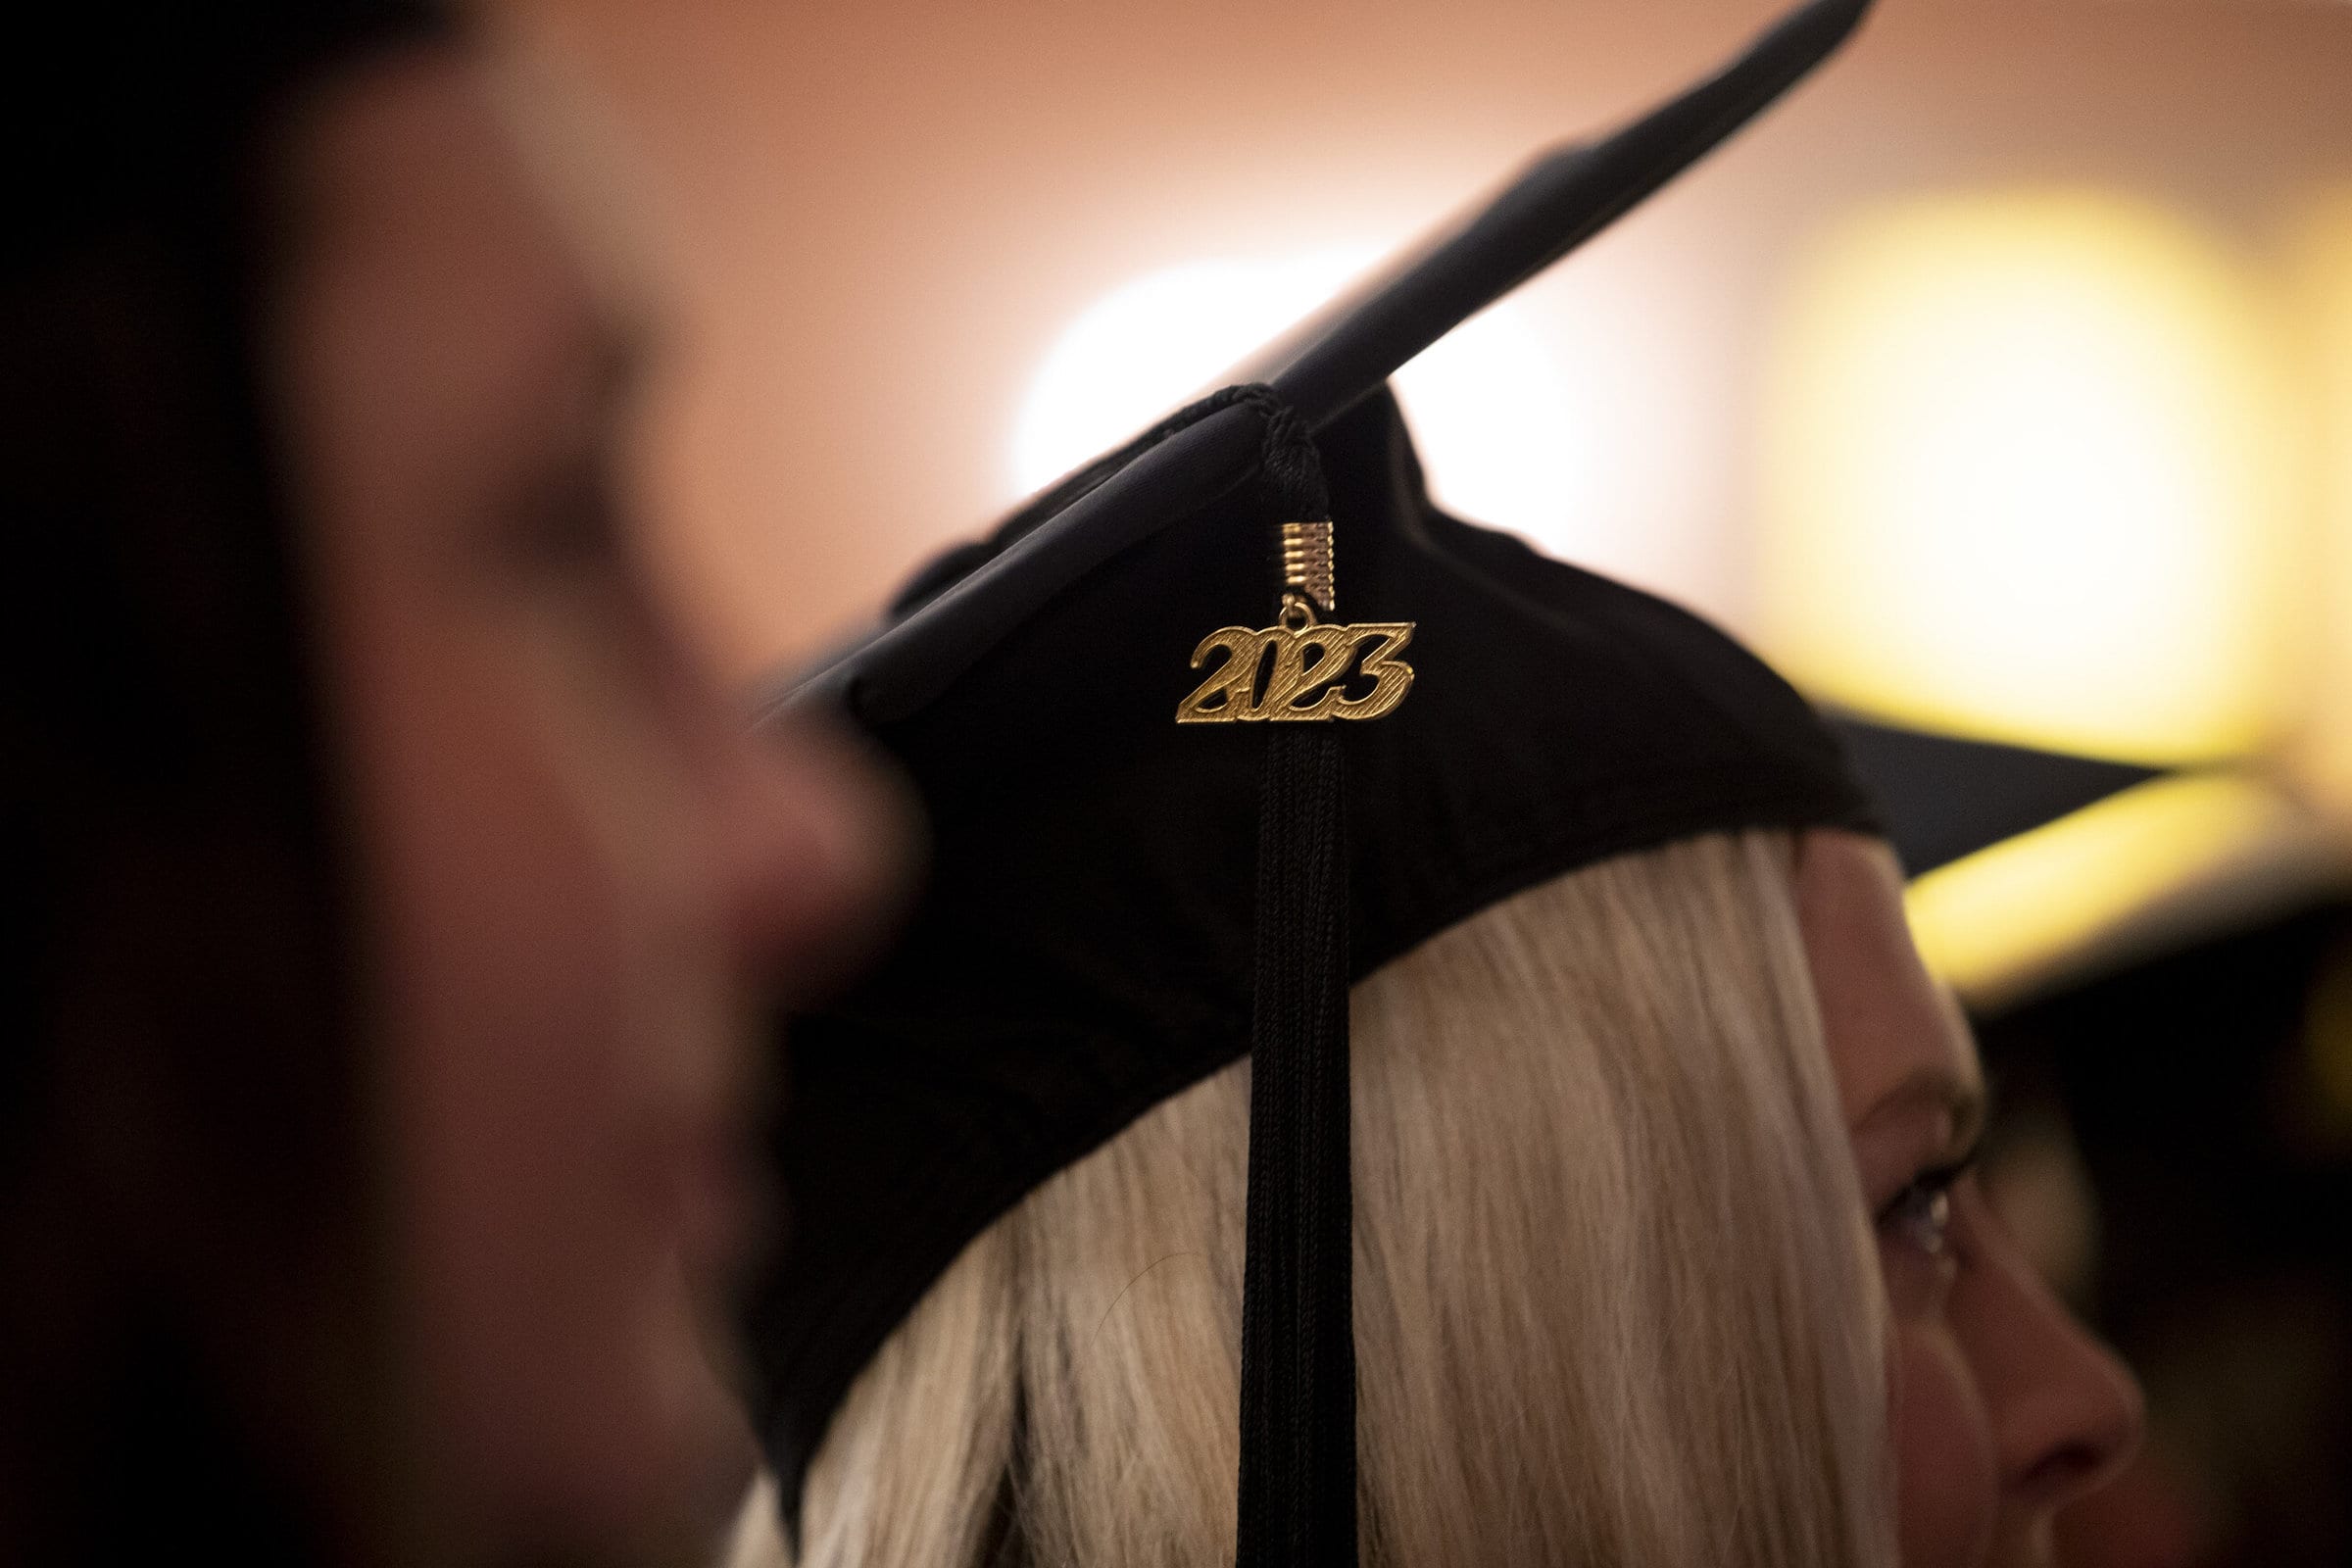 The 2023 charm dangles from a motorboard at the the 2023 winter commencement ceremonies.